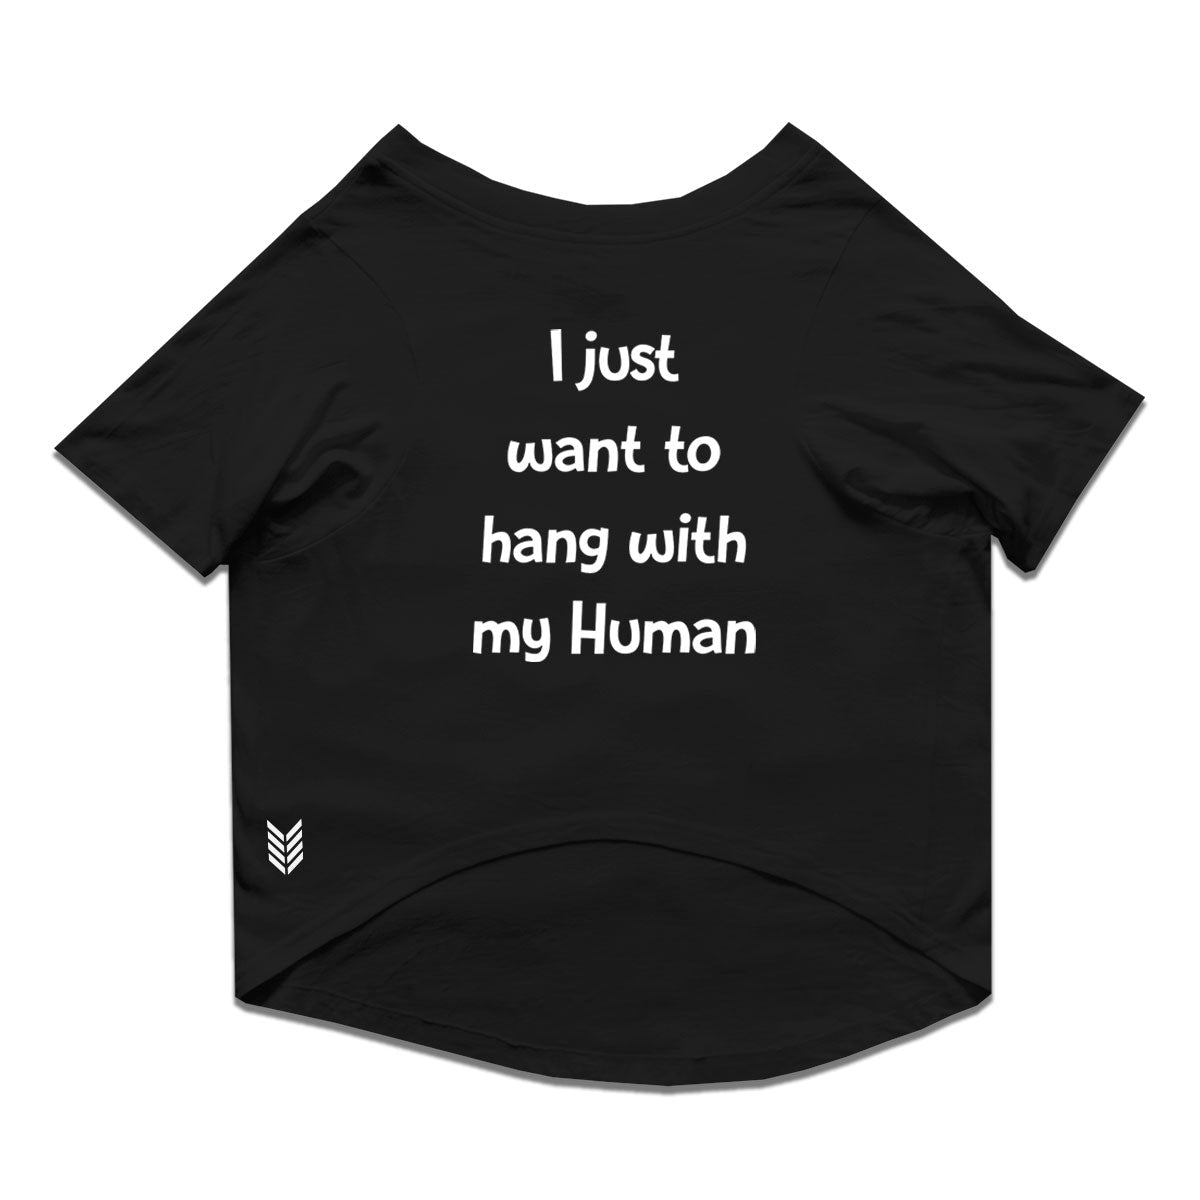 Ruse / i-just-want-to-hang-with-my-human-crew-neck-dog-tee / Black